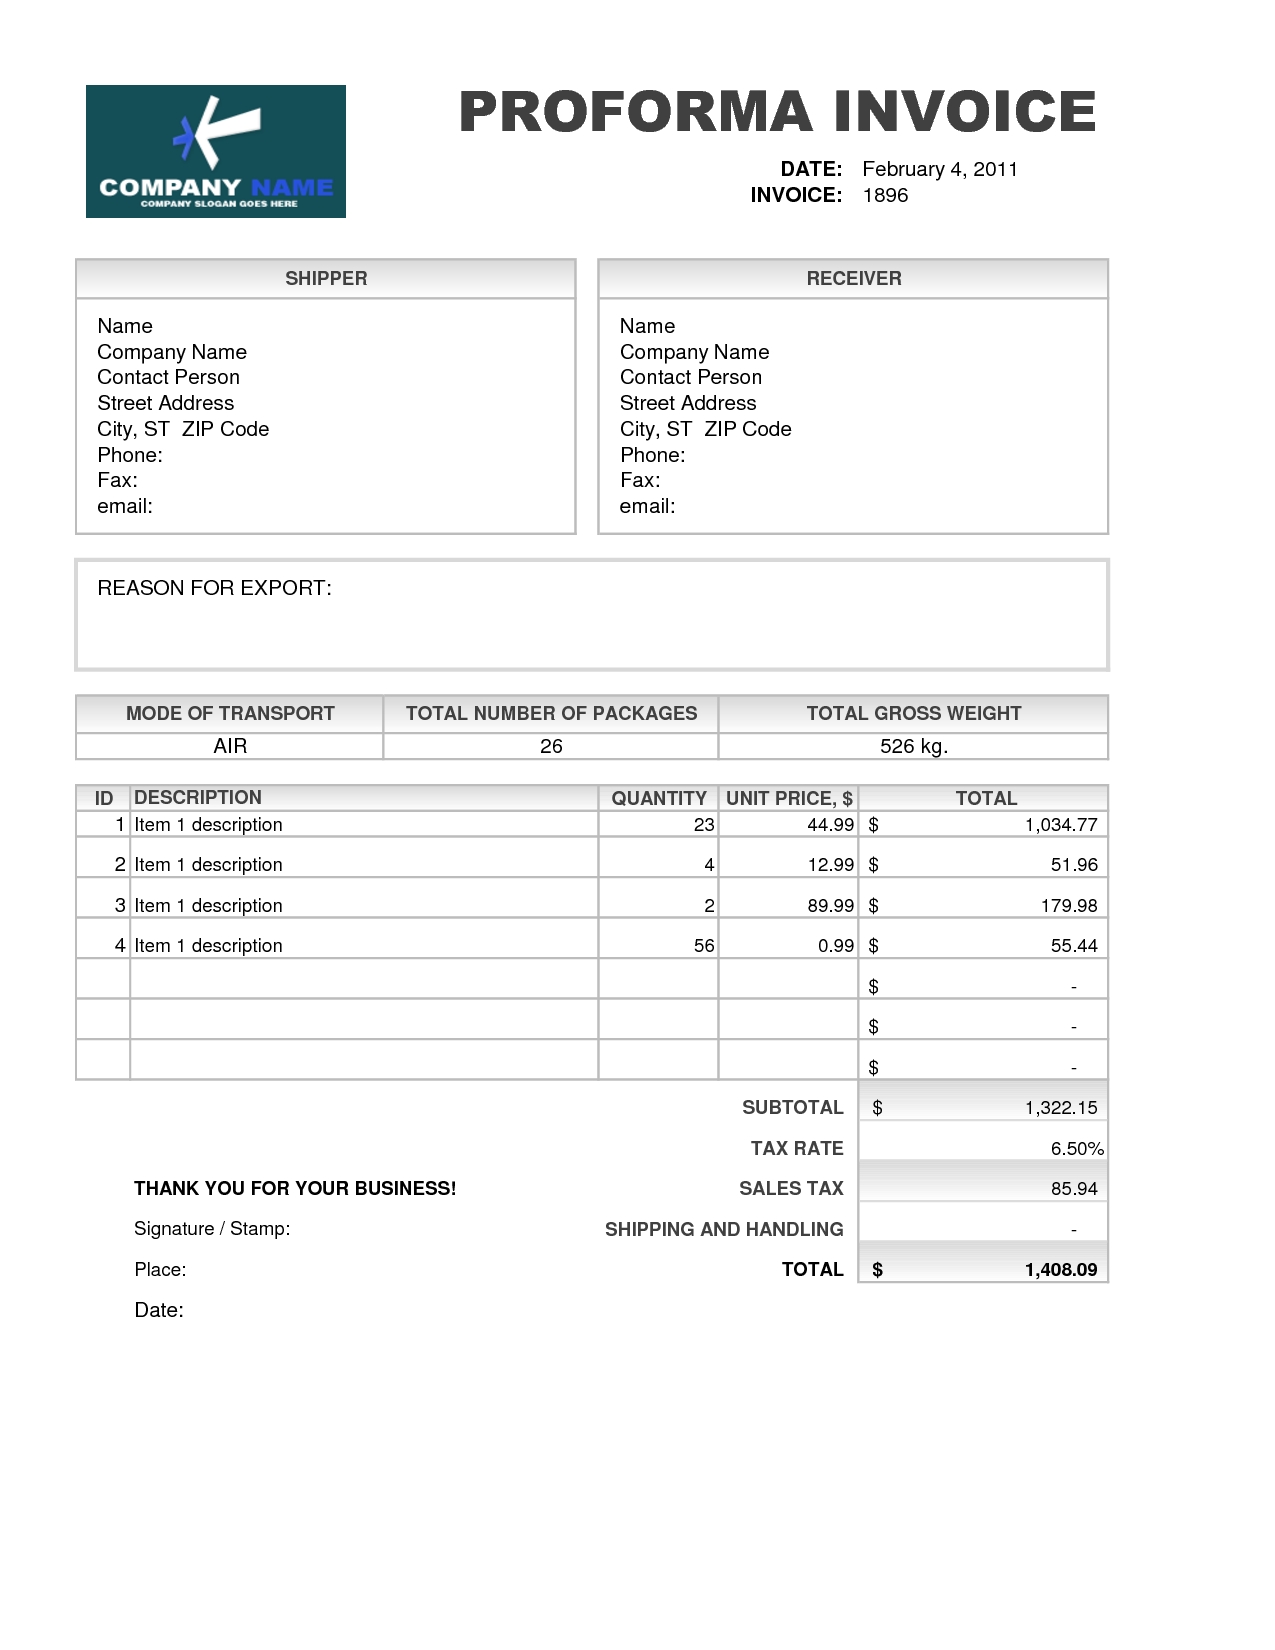 proforma invoice template exceleasy2yes easy2yes pro foma invoice